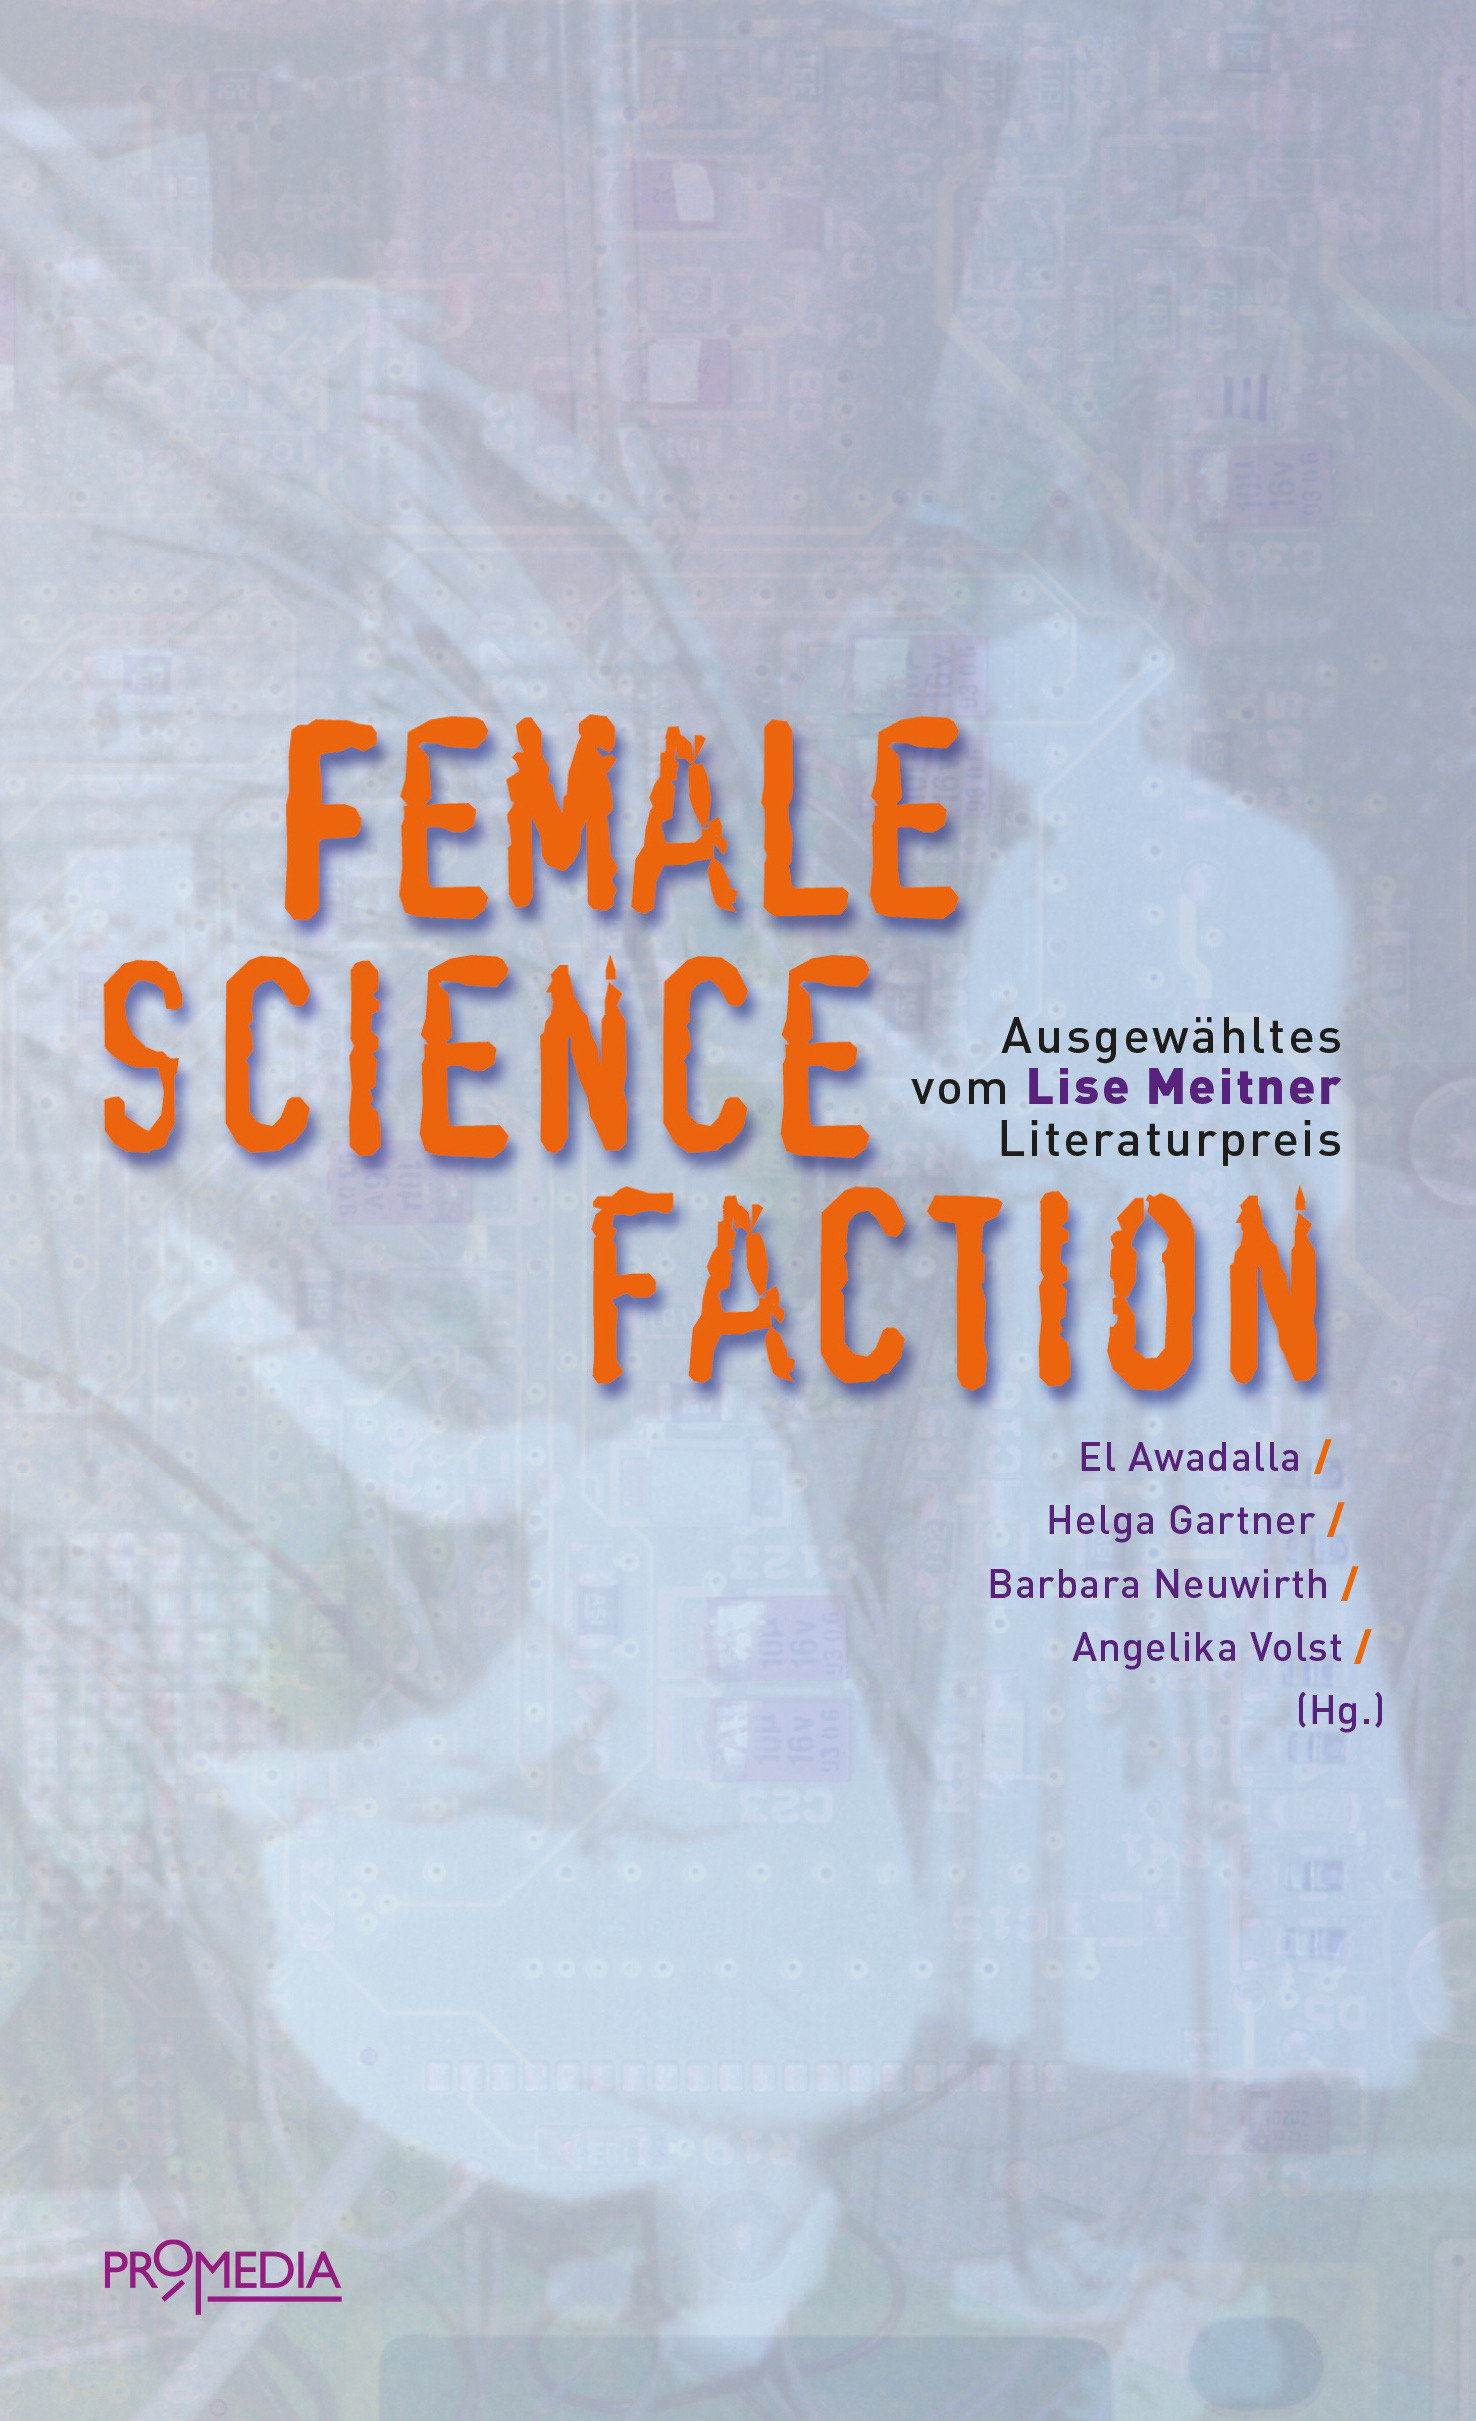 [Cover] Female Science Faction